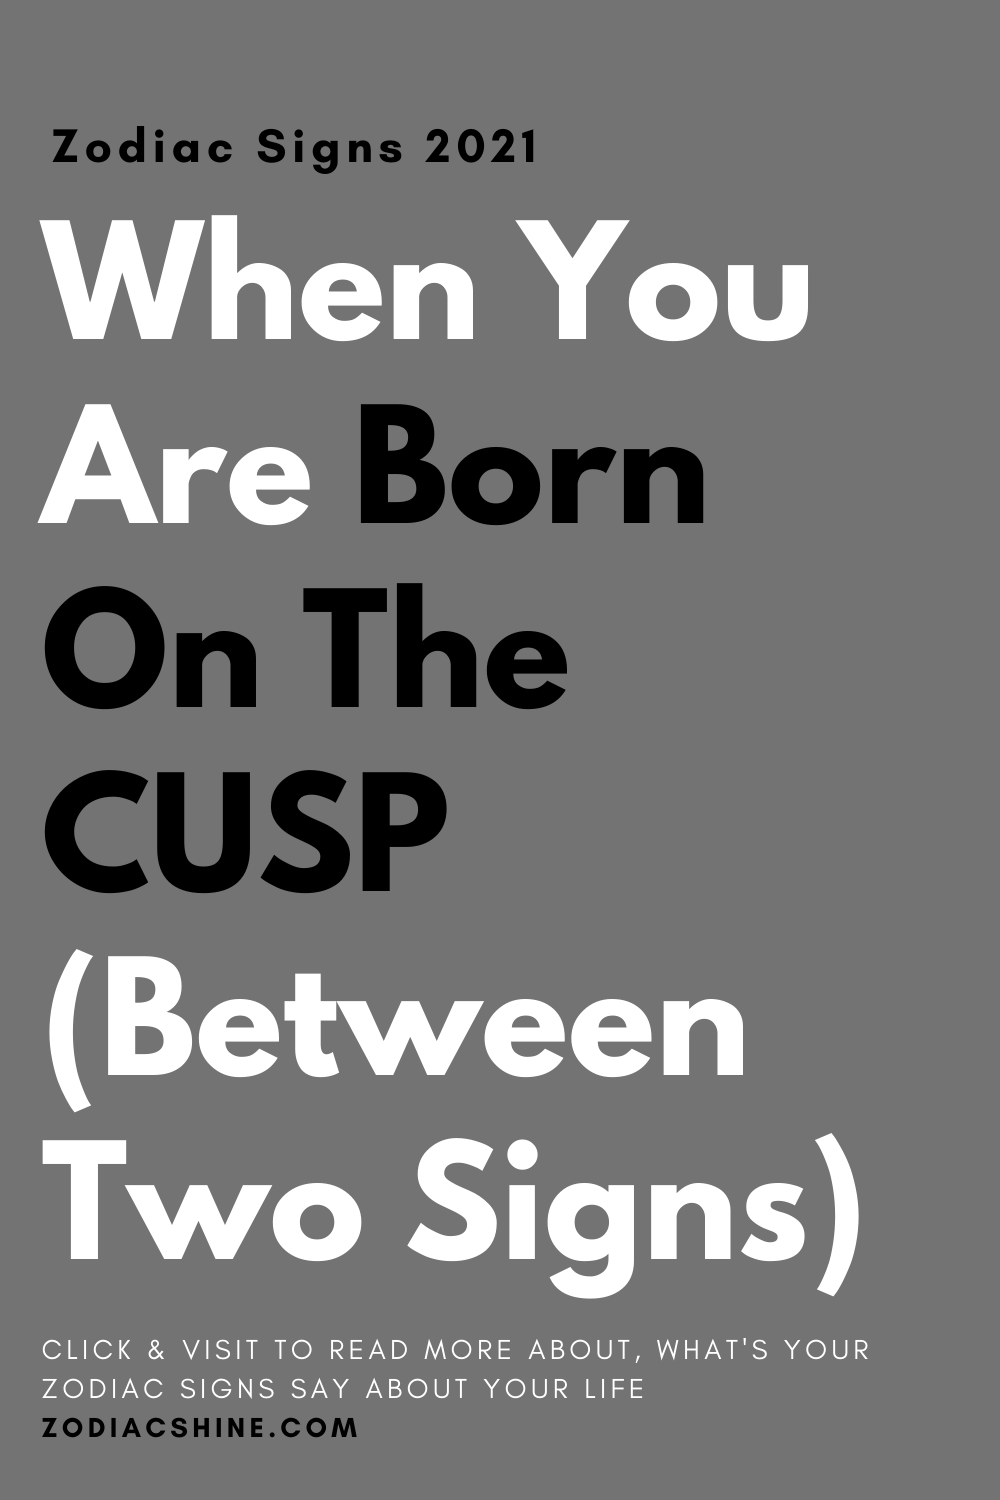 When You Are Born On The CUSP (Between Two Signs)